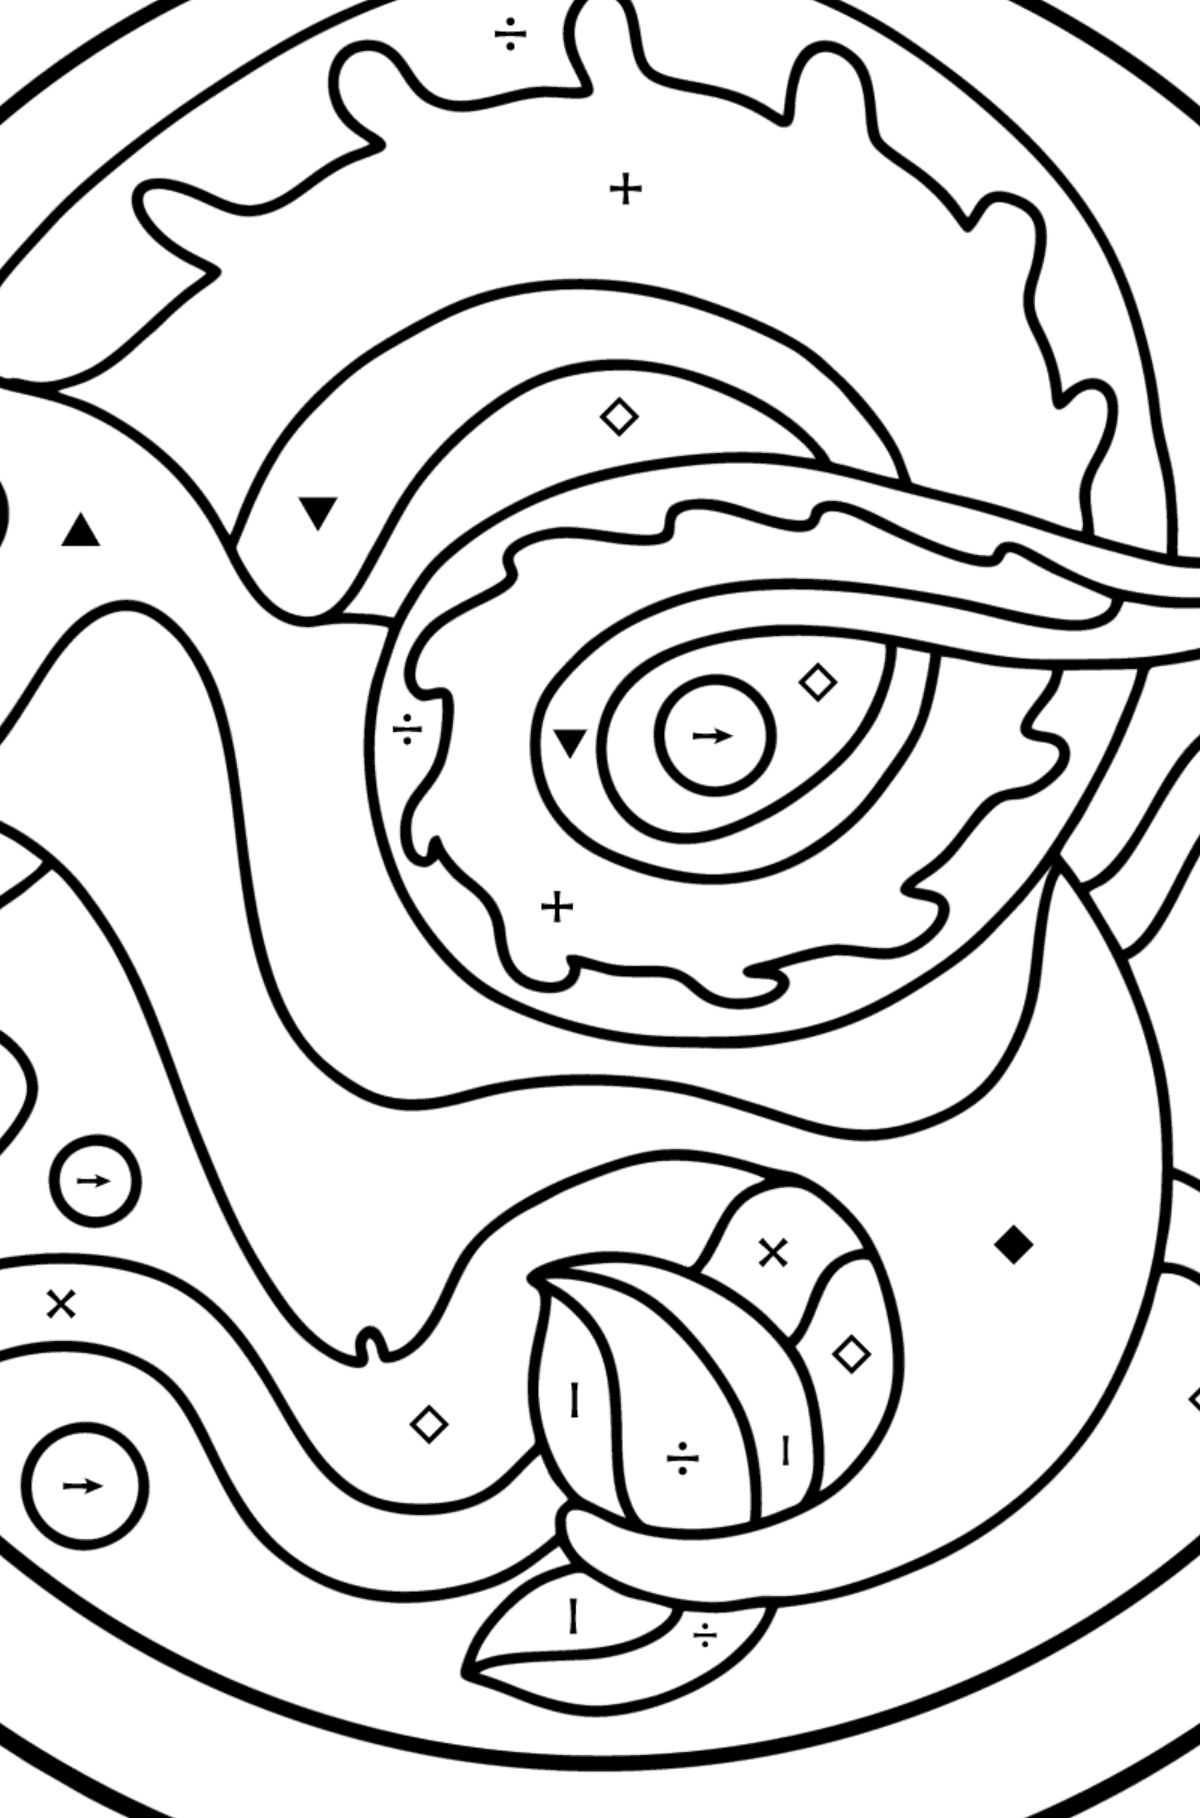 Coloring page for kids - Capricorn zodiac sign - Coloring by Symbols for Kids